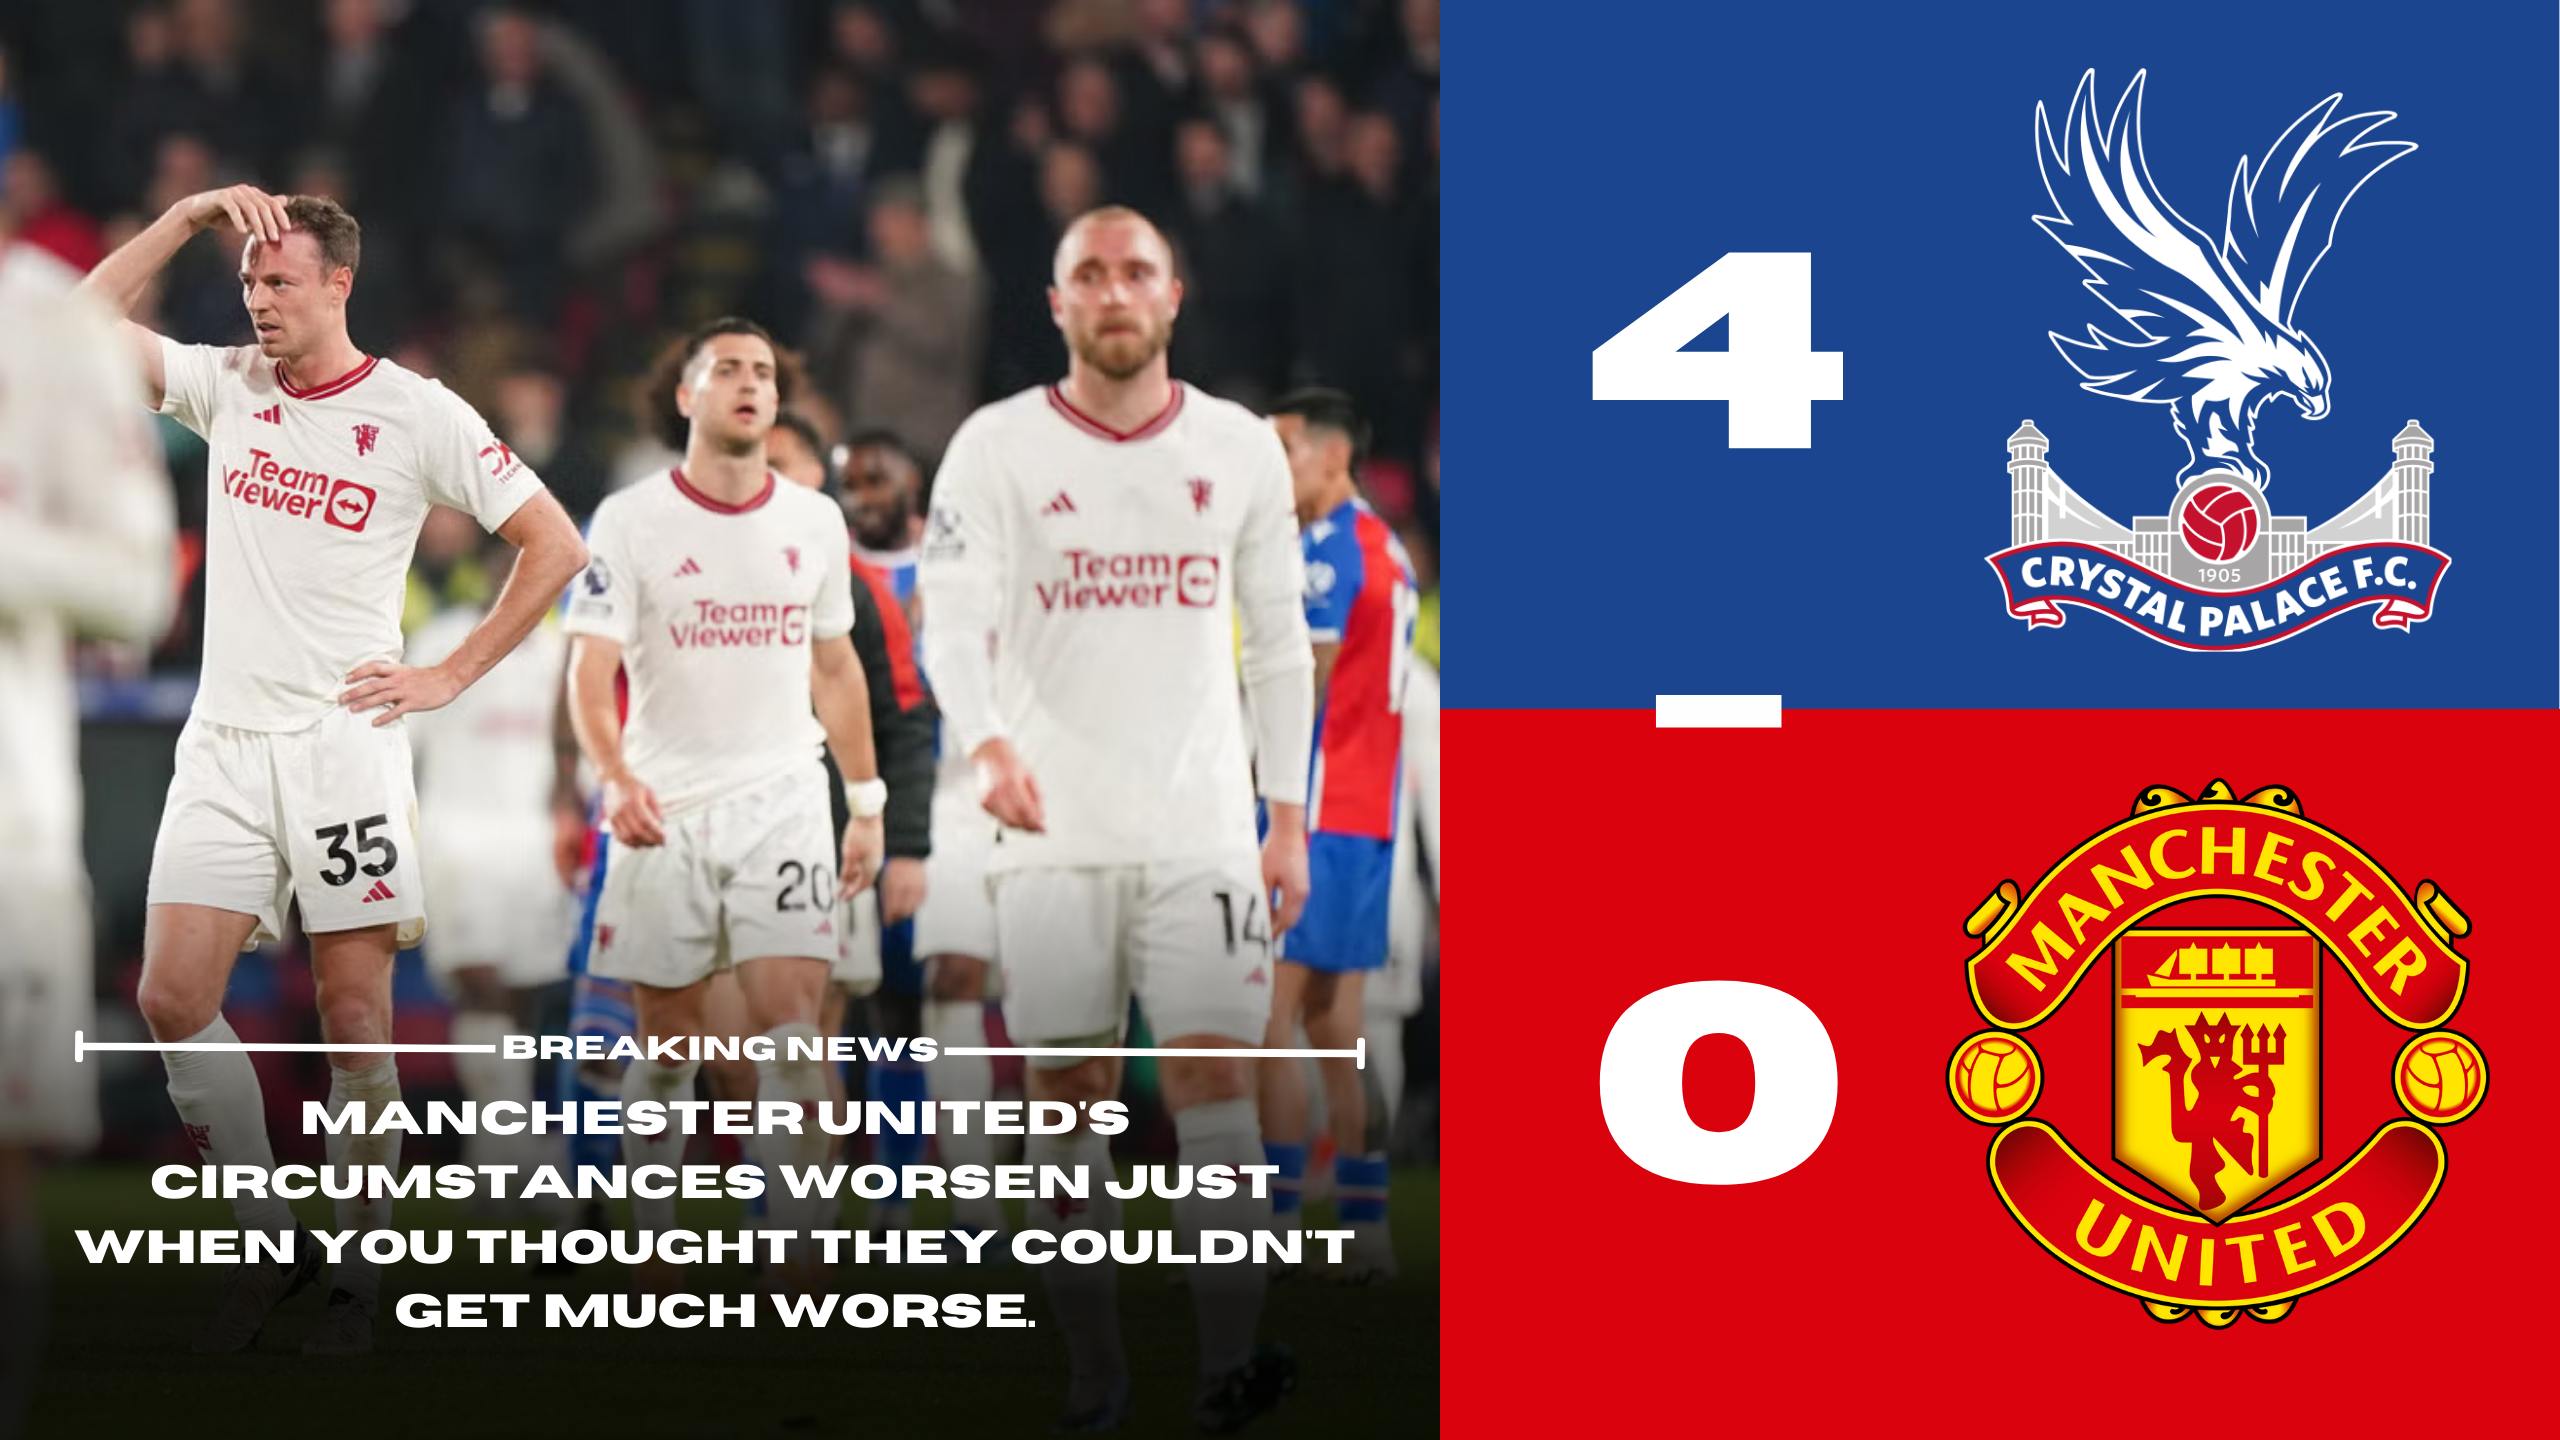 Crystal Palace 4 - 0 Manchester United. Manchester United's circumstances worsen just when you thought they couldn't get much worse.